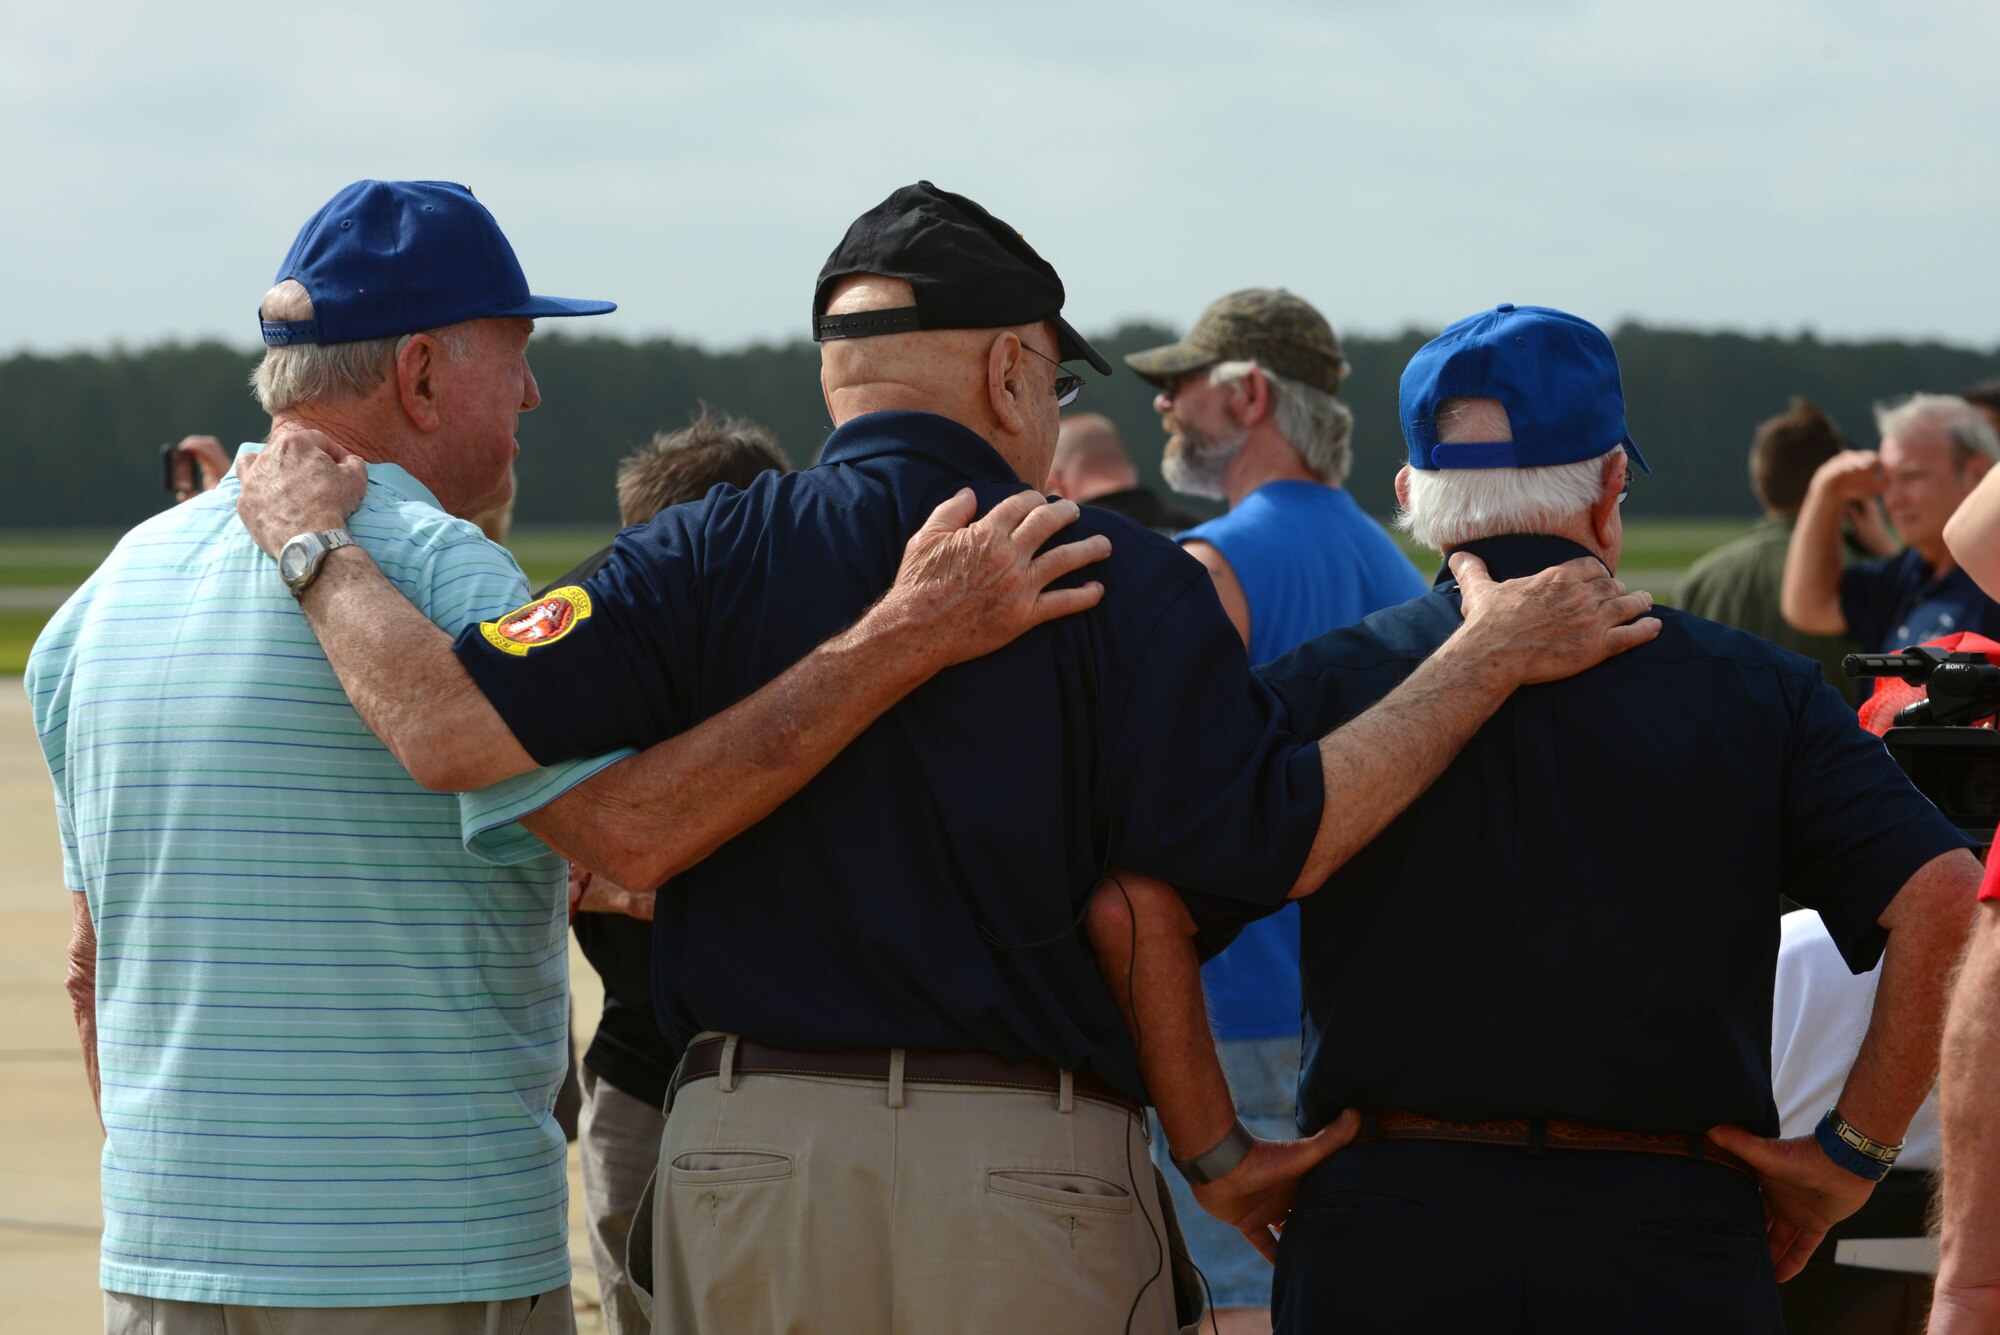 U.S. Air Force veterans gather during an F-16 Viper Demonstration Team practice at Shaw Air Force Base, S.C., June 23, 2017. The practice gave the veterans, former Wild Weasels, a close-up look at the F-16CM Fighting Falcon, the aircraft Shaw currently uses to carry out the suppression of enemy air defenses mission. (U.S. Air Force photo by Airman 1st Class Kathryn R.C. Reaves)